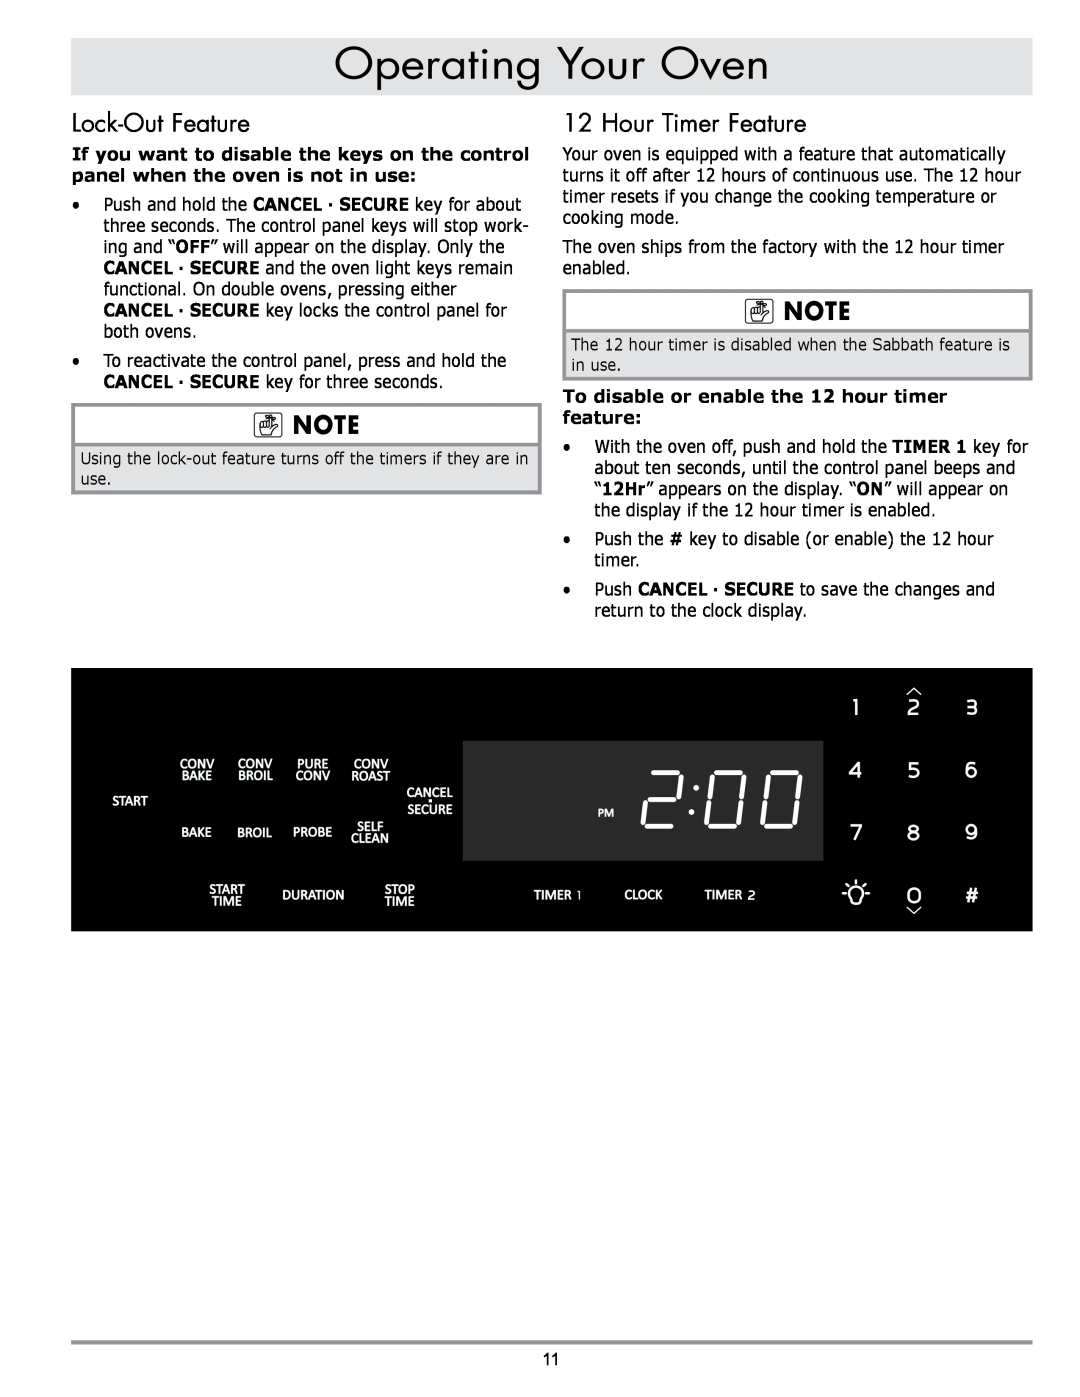 Dacor DO130 Lock-Out Feature, Hour Timer Feature, To disable or enable the 12 hour timer feature, Operating Your Oven 